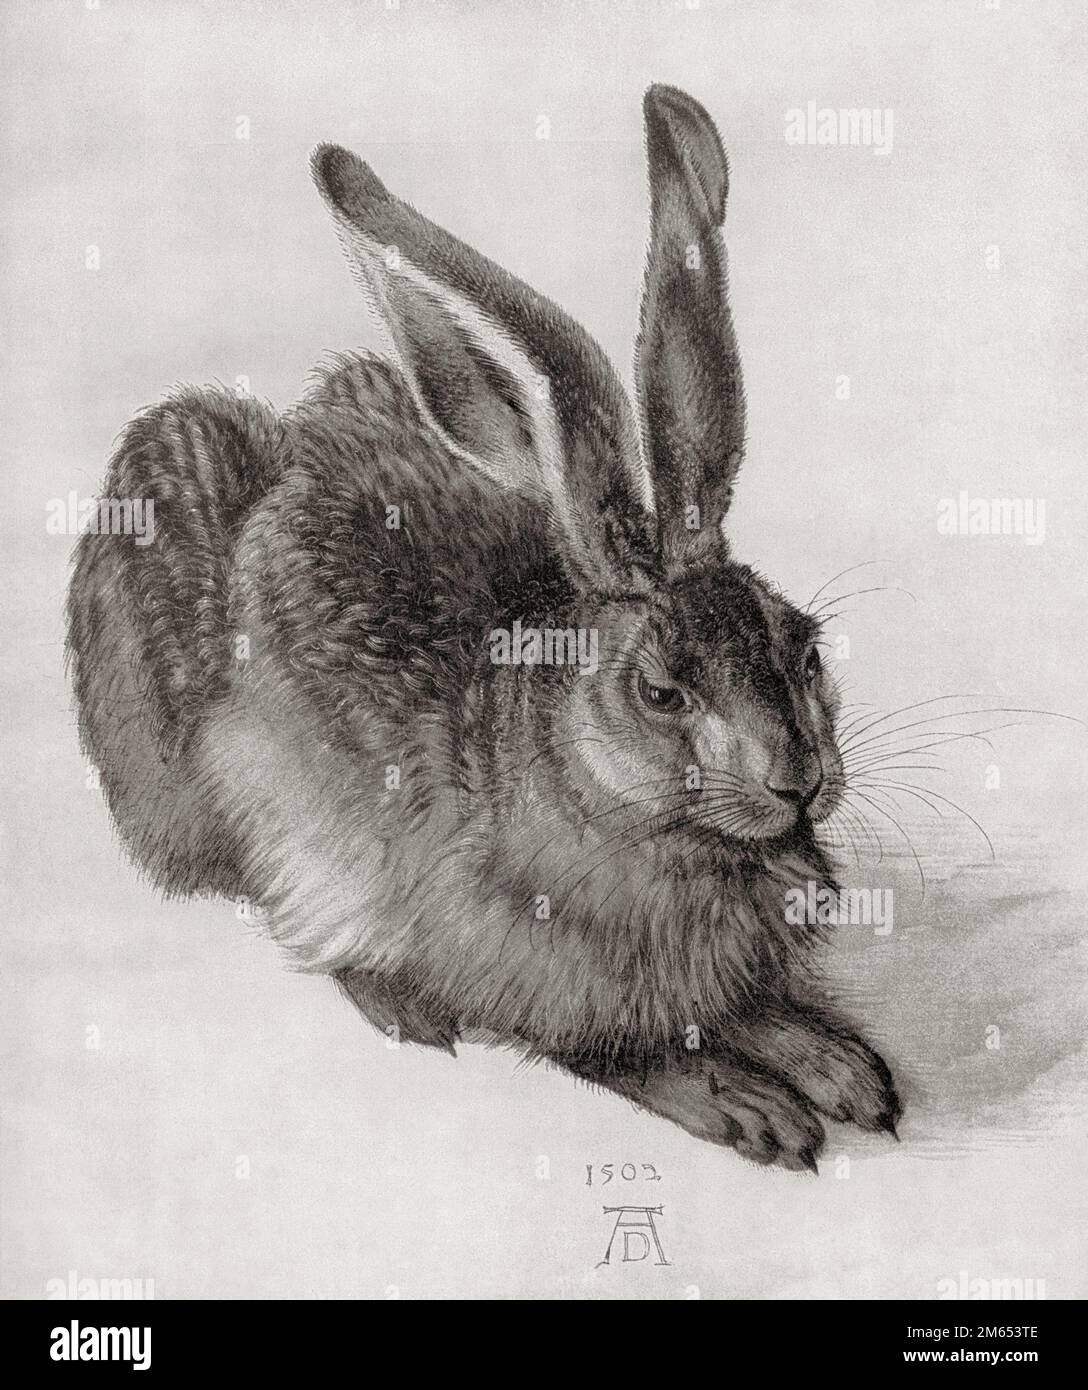 A young hare, after the work by Albrecht Dürer, 1471 – 1528, sometimes spelled in English as Durer. German painter, printmaker, and theorist of the German Renaissance. From Albrecht Dürer, Sein Leben und eine Auswahl seiner Werke or His life and a selection of his works, published 1928. Stock Photo